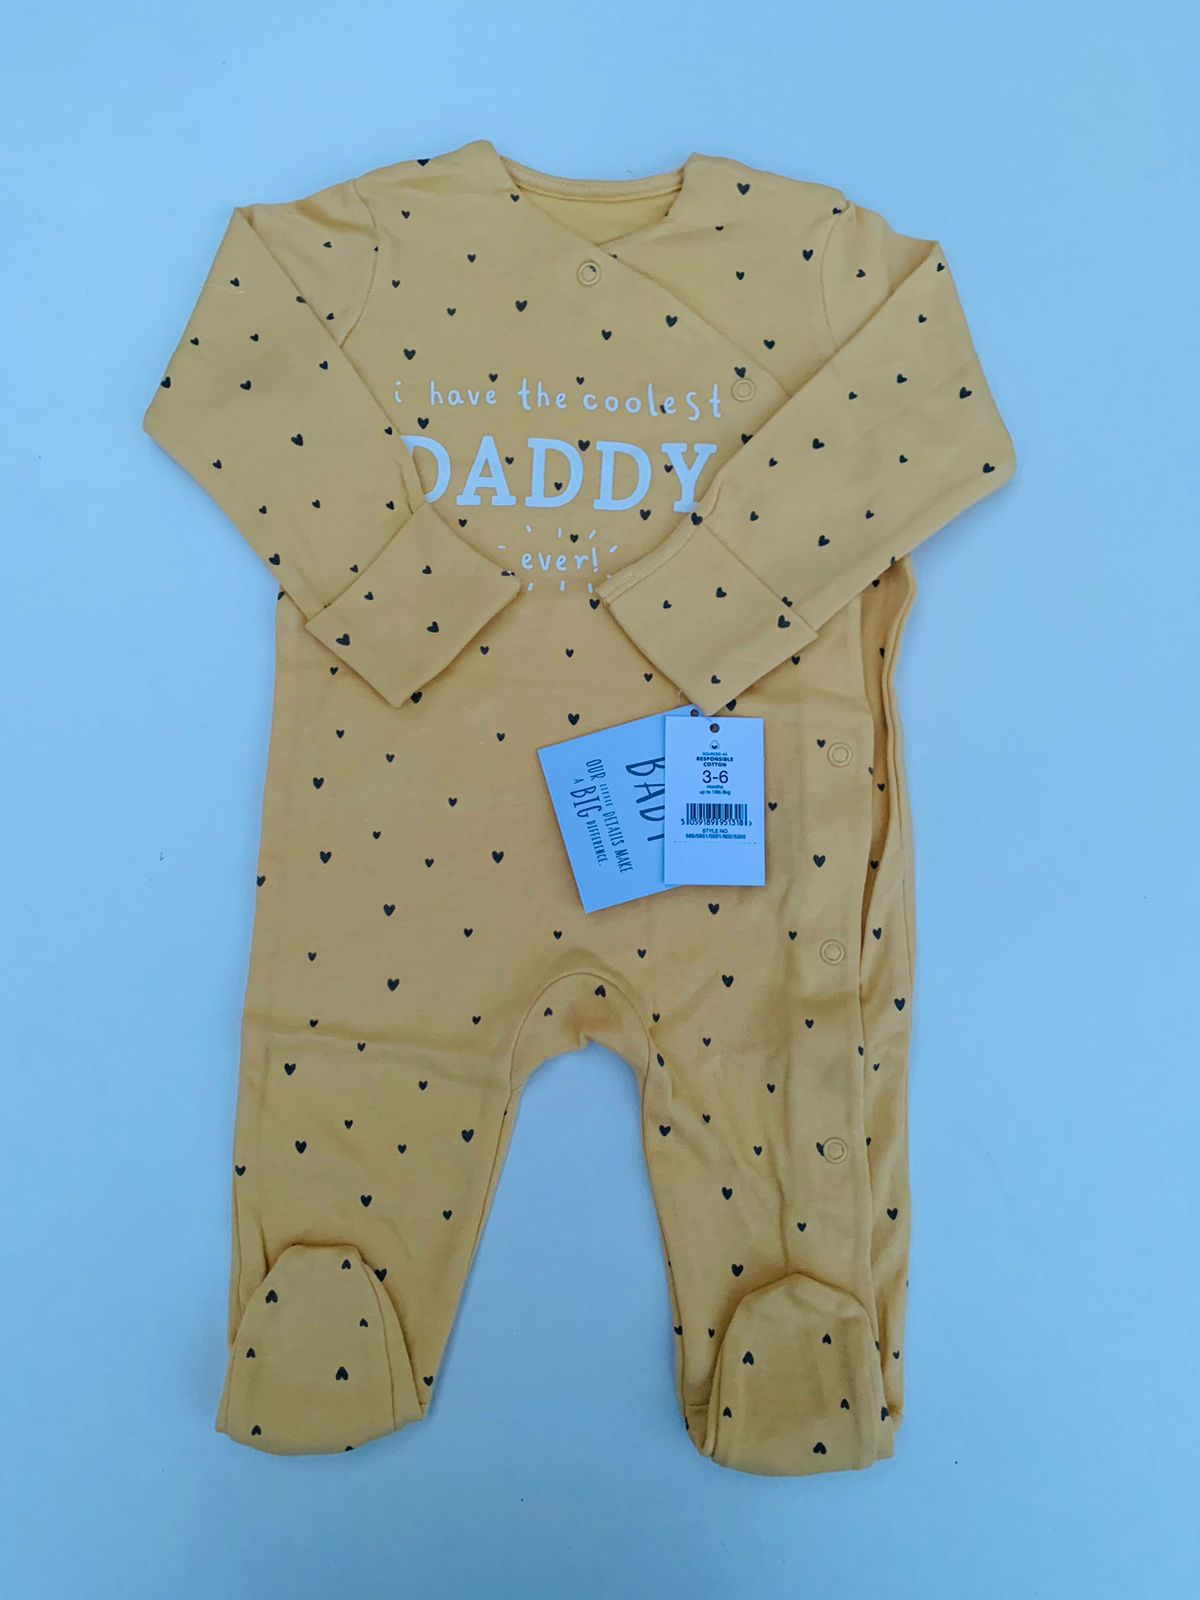 George "Coolest Daddy" Sleepsuit